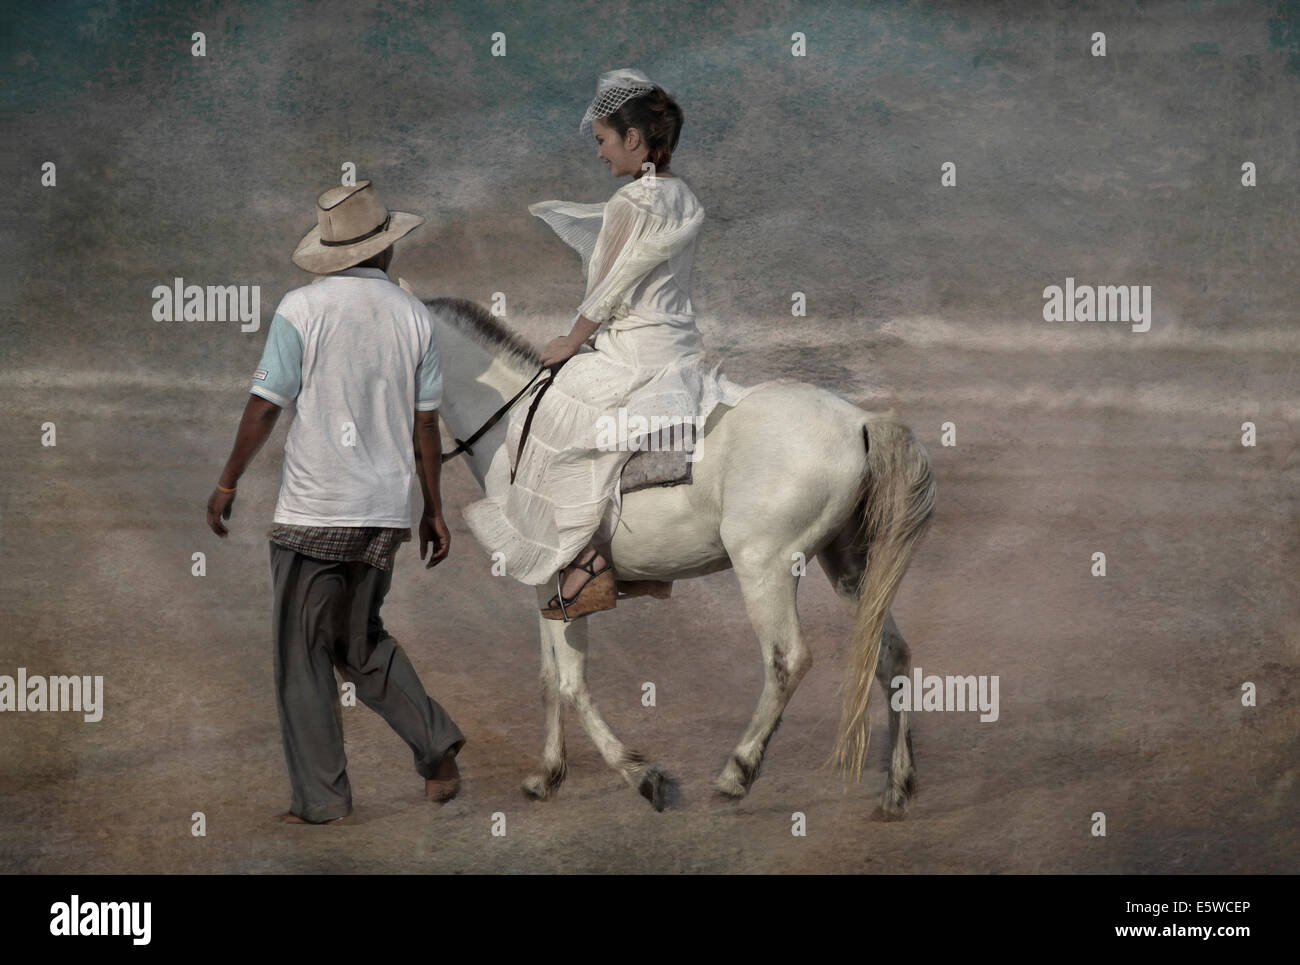 Woman beach horse. Painterly and canvas textured image of female wearing a white lace dress and riding a white horse on the beach Stock Photo